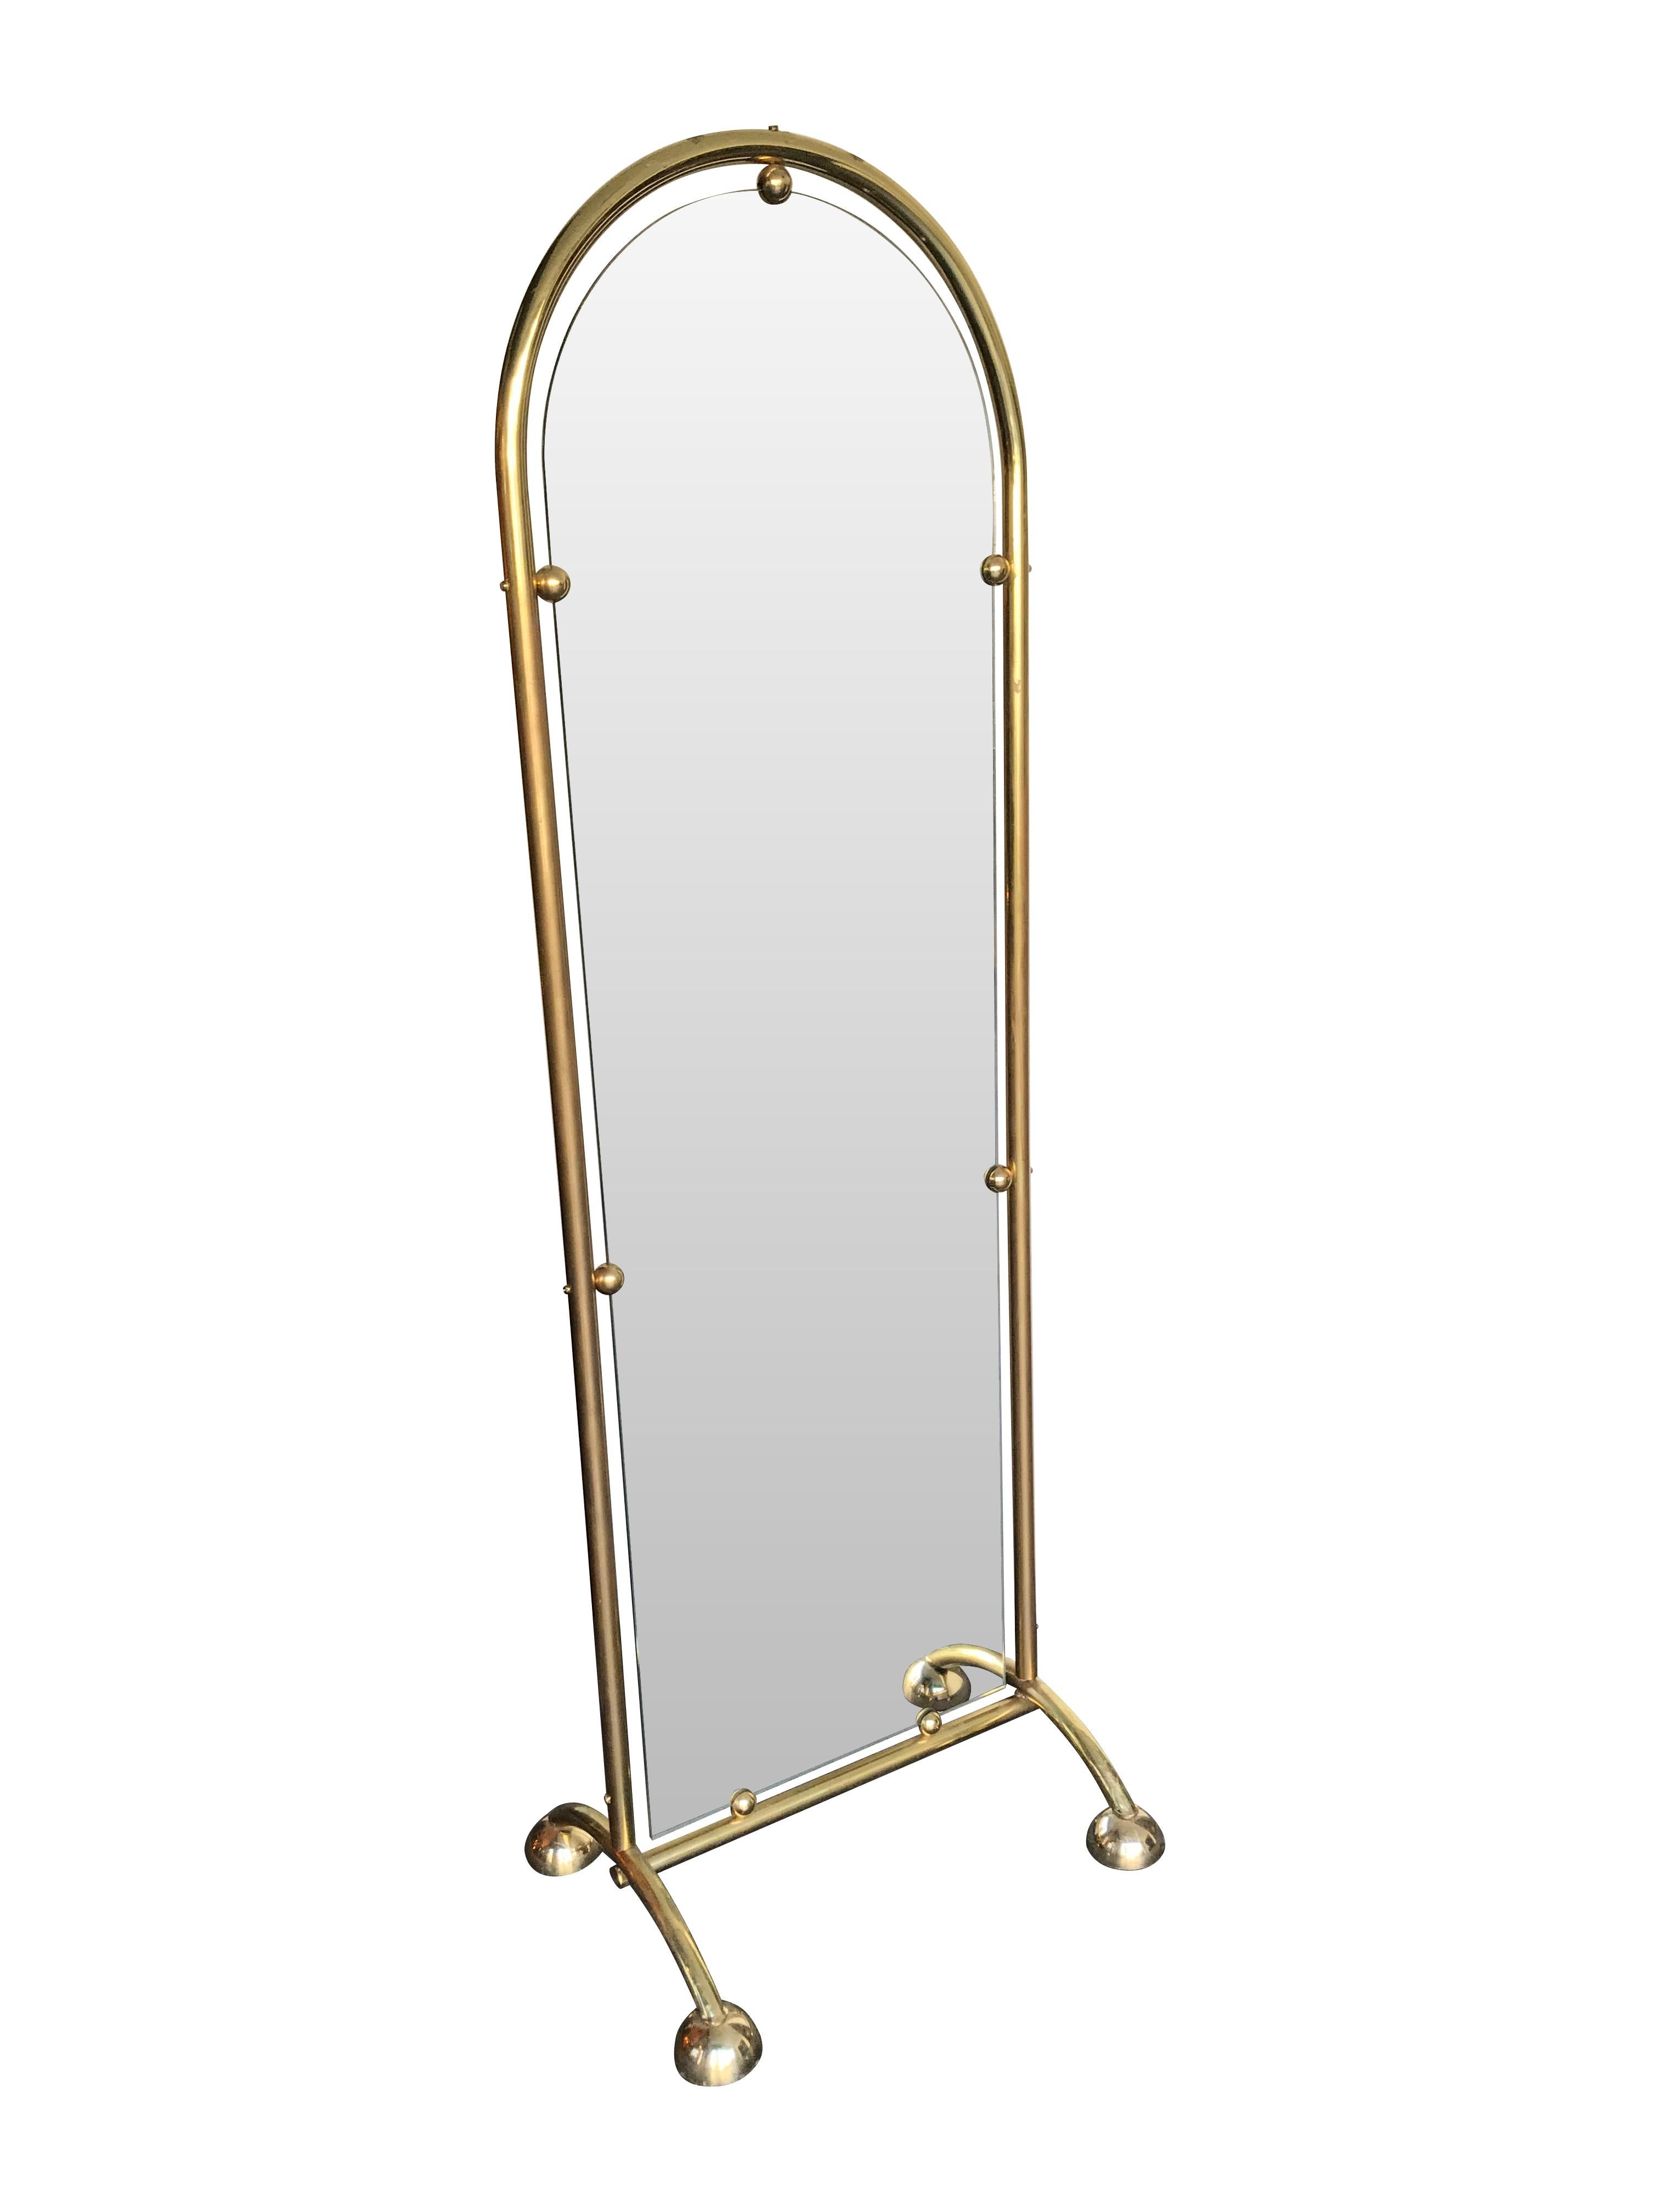 An Italian double sided full length tailors mirror with brass frame and splayed feet each with castors under the domed feet. The mirror floats inside the brass frame and fixed at seven points around the outside.